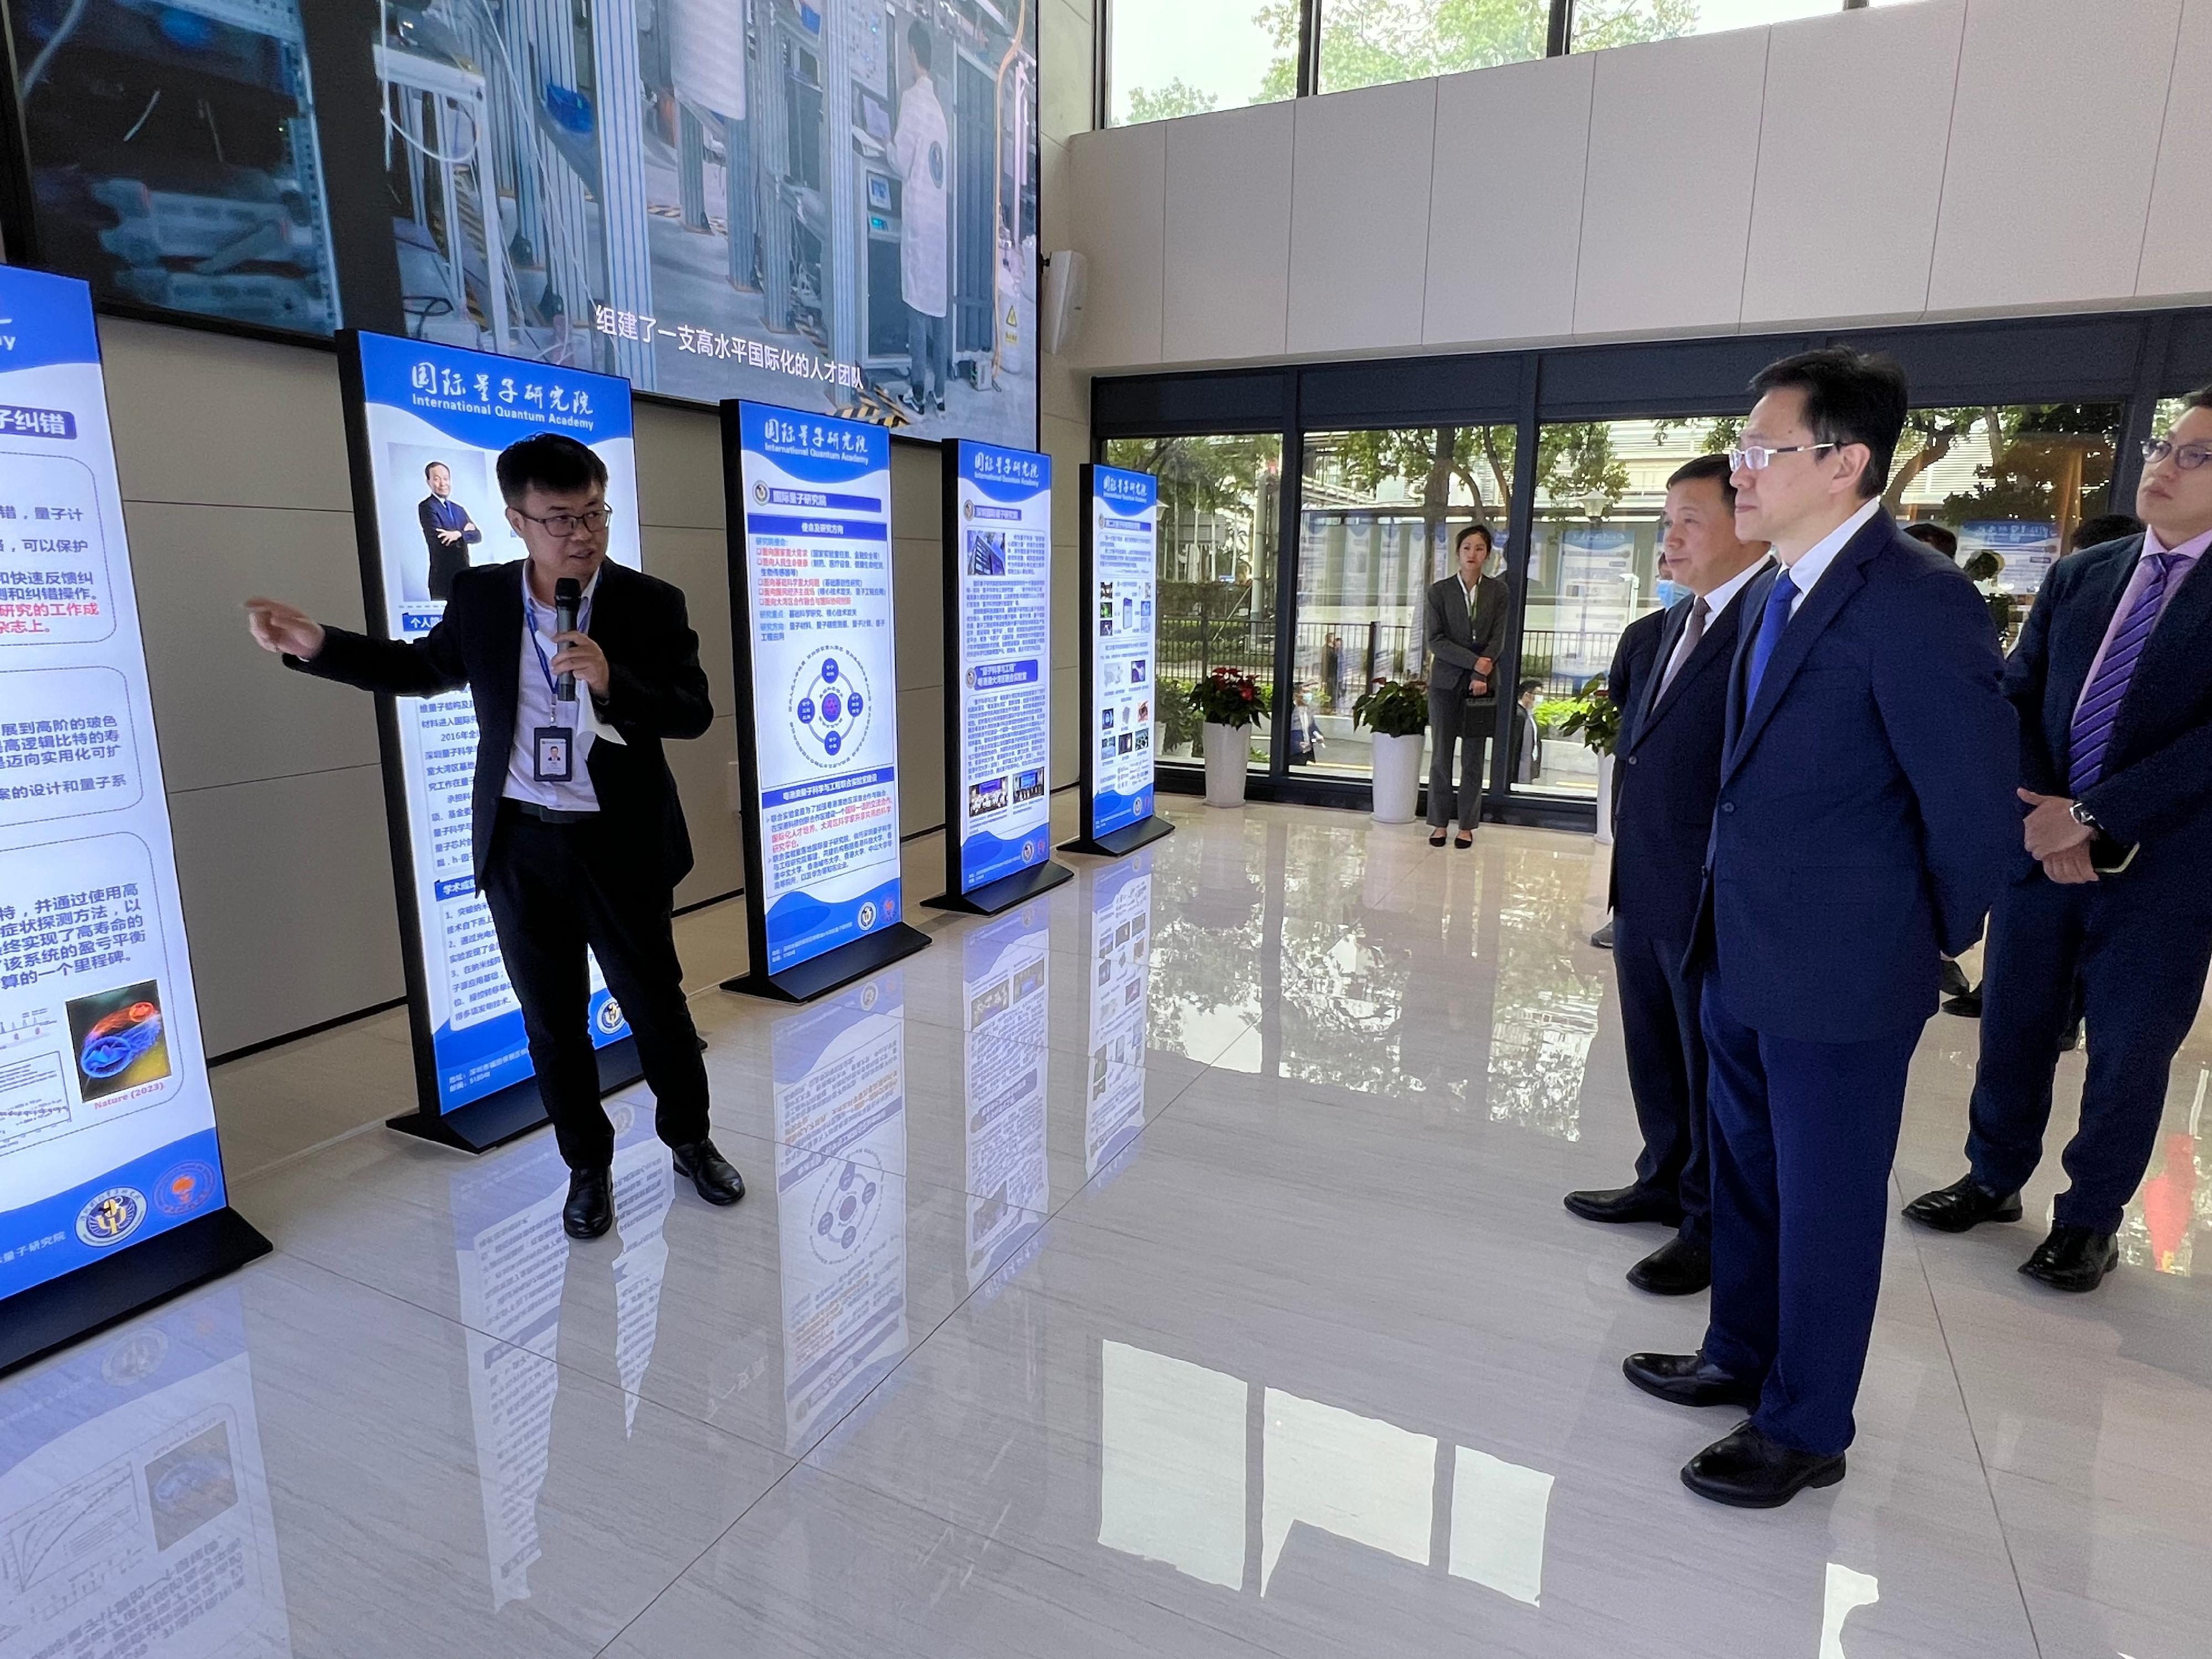 The Secretary for Innovation, Technology and Industry, Professor Sun Dong (second right), visits the Shenzhen International Quantum Academy in Shenzhen today (March 30) and receives a briefing on the operation and scientific achievements of the Academy.